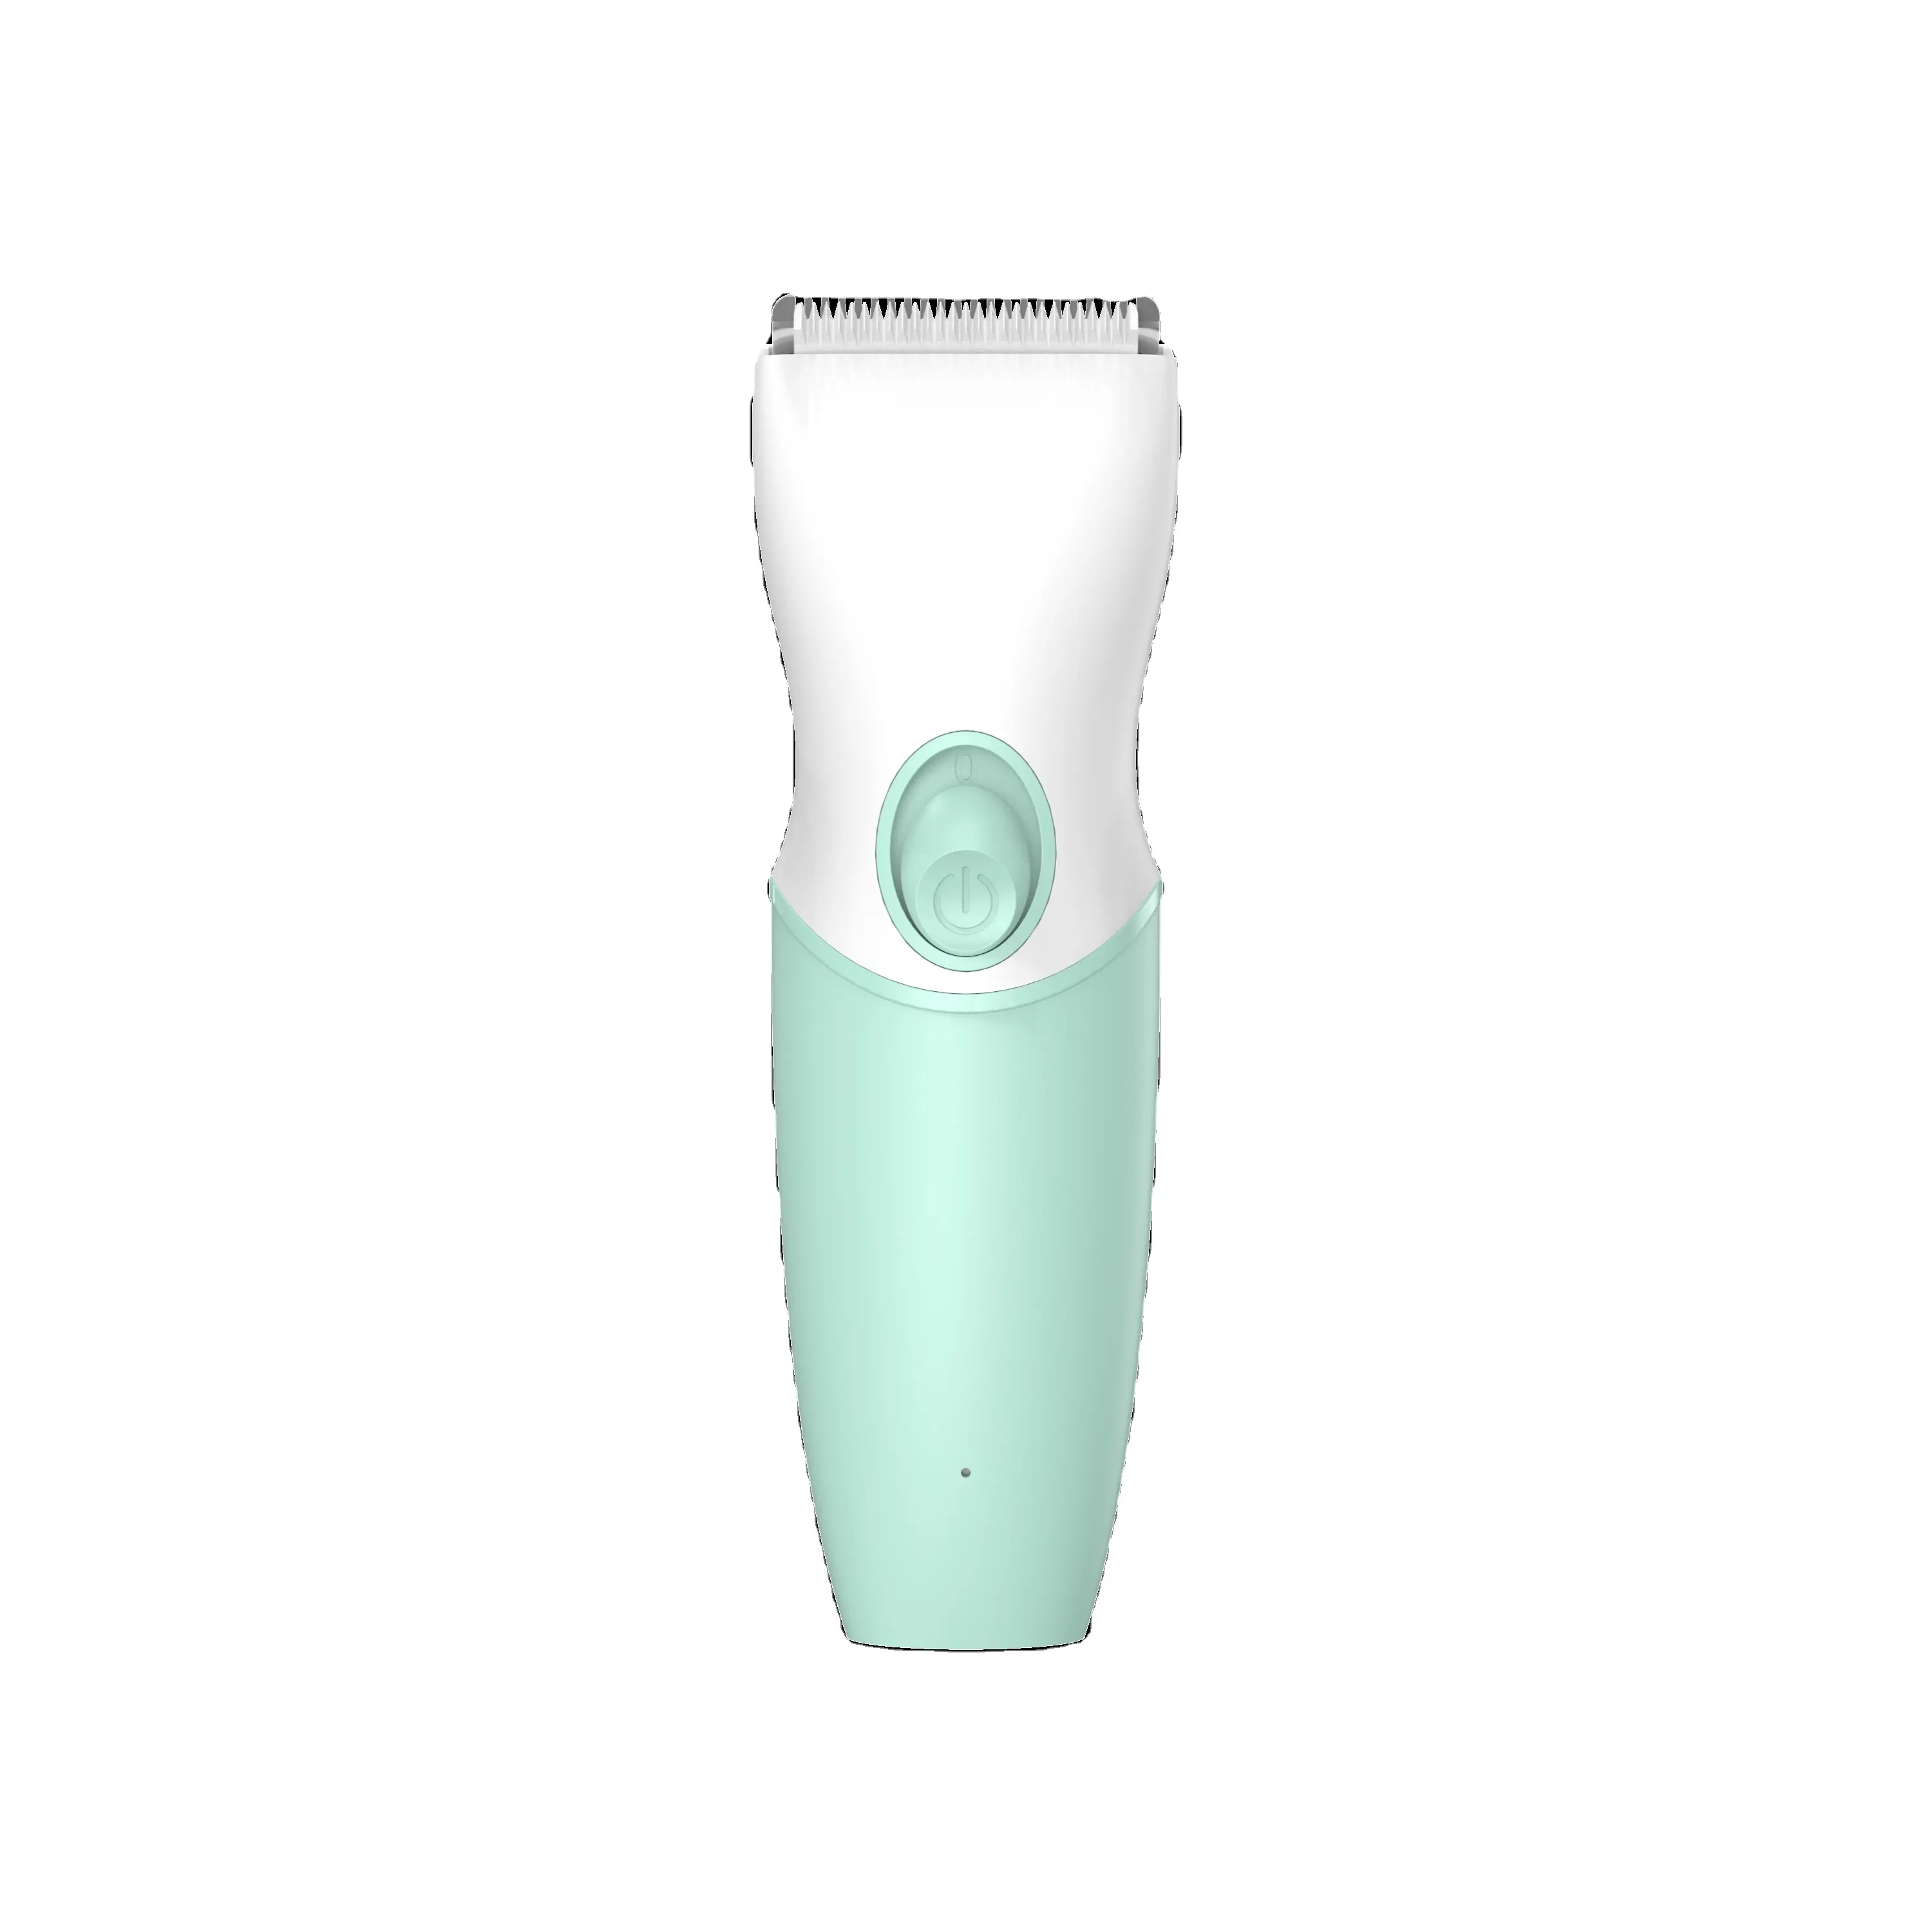 Wholesale Hot Electric Baby Hair Clipper/hair Trimmer Household S510,S510 1 Year,1 Year Stainless Steel 5W